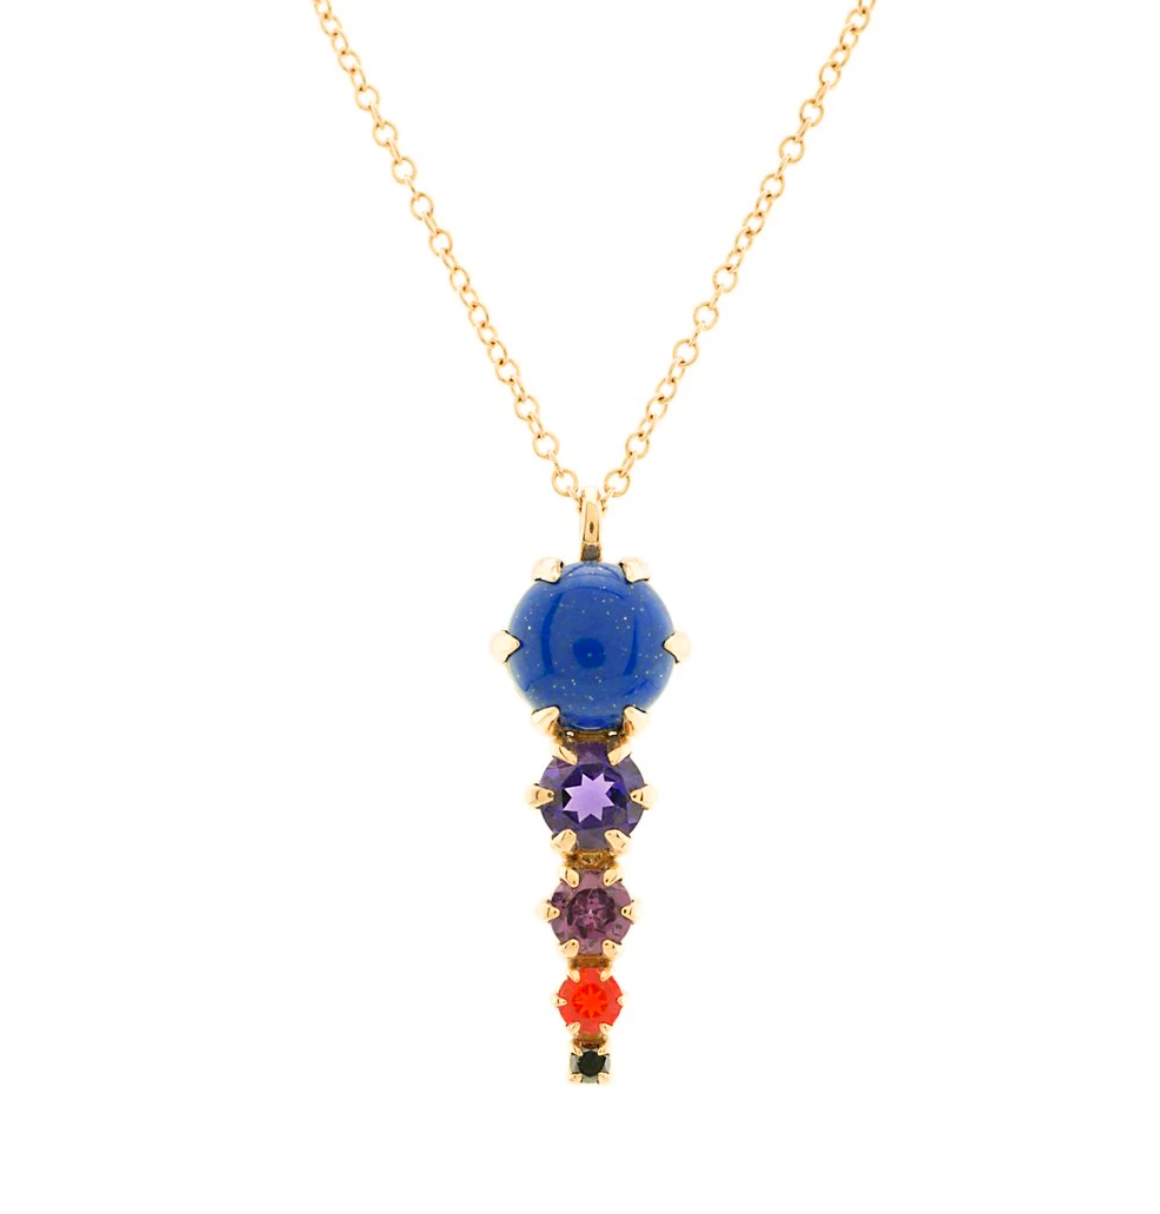 Gem spike pendant necklace, with Lapis, amethyst, garnet, fire opal, and black diamond gemstones, close up on white background.